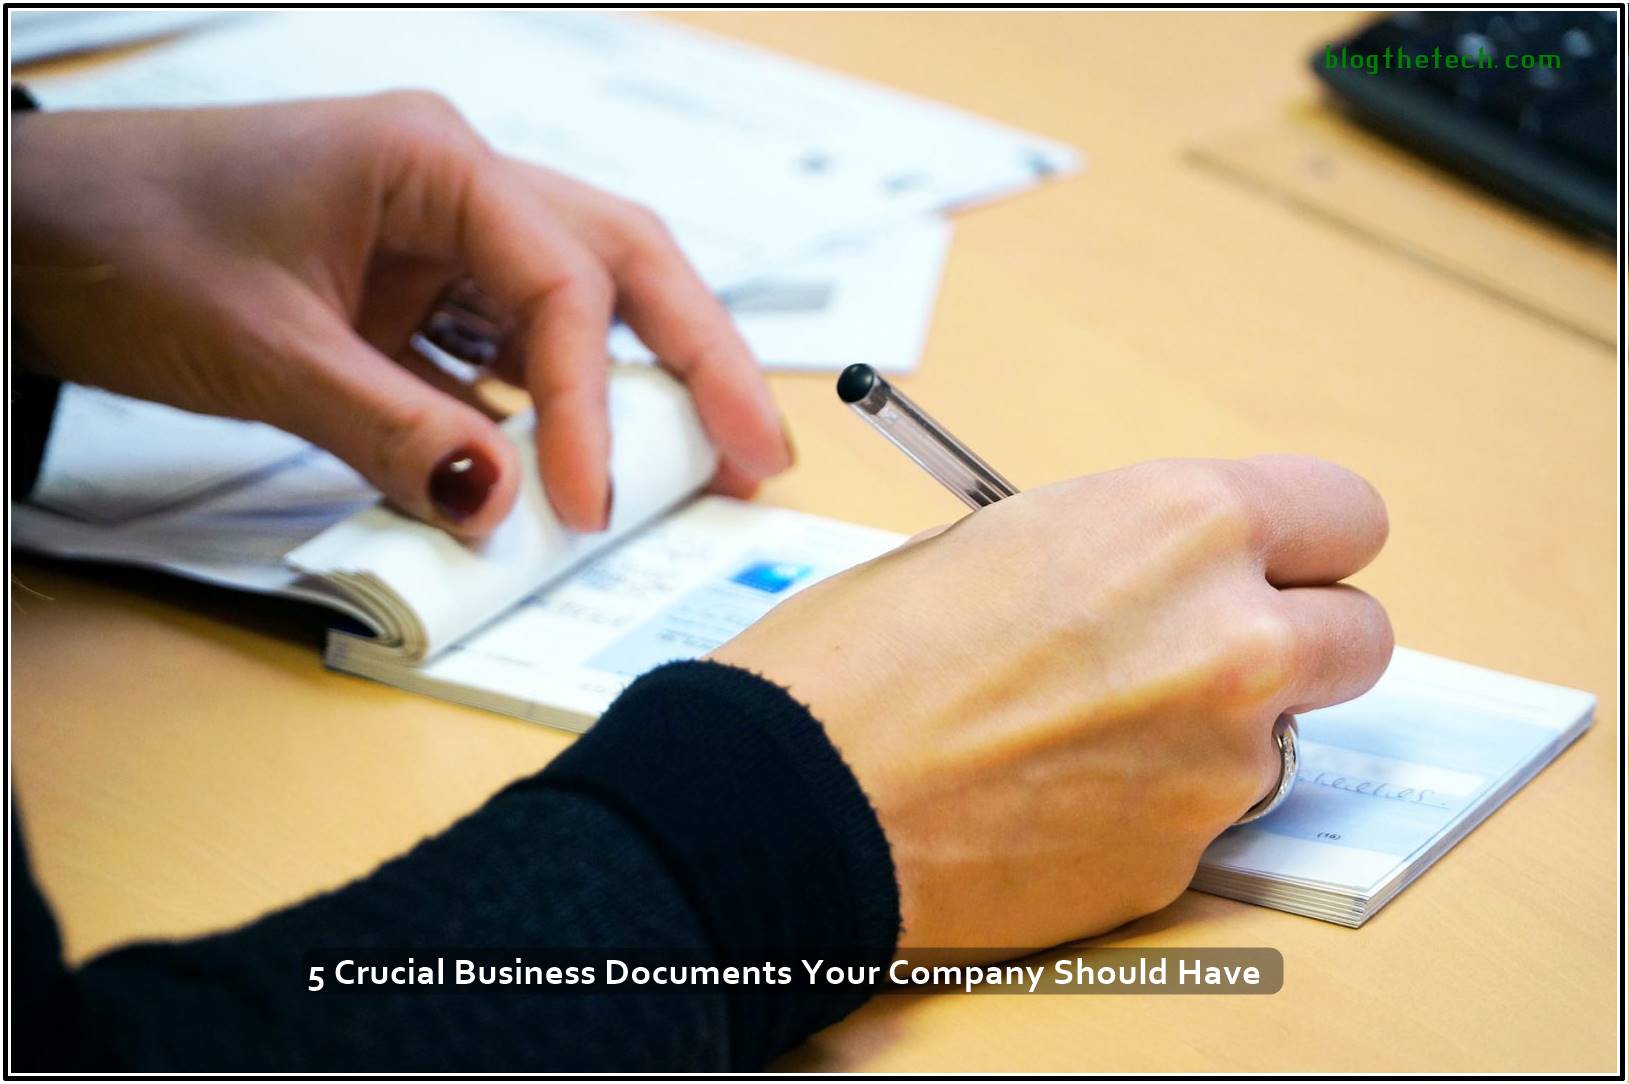 5 Crucial Business Documents Your Company Should Have